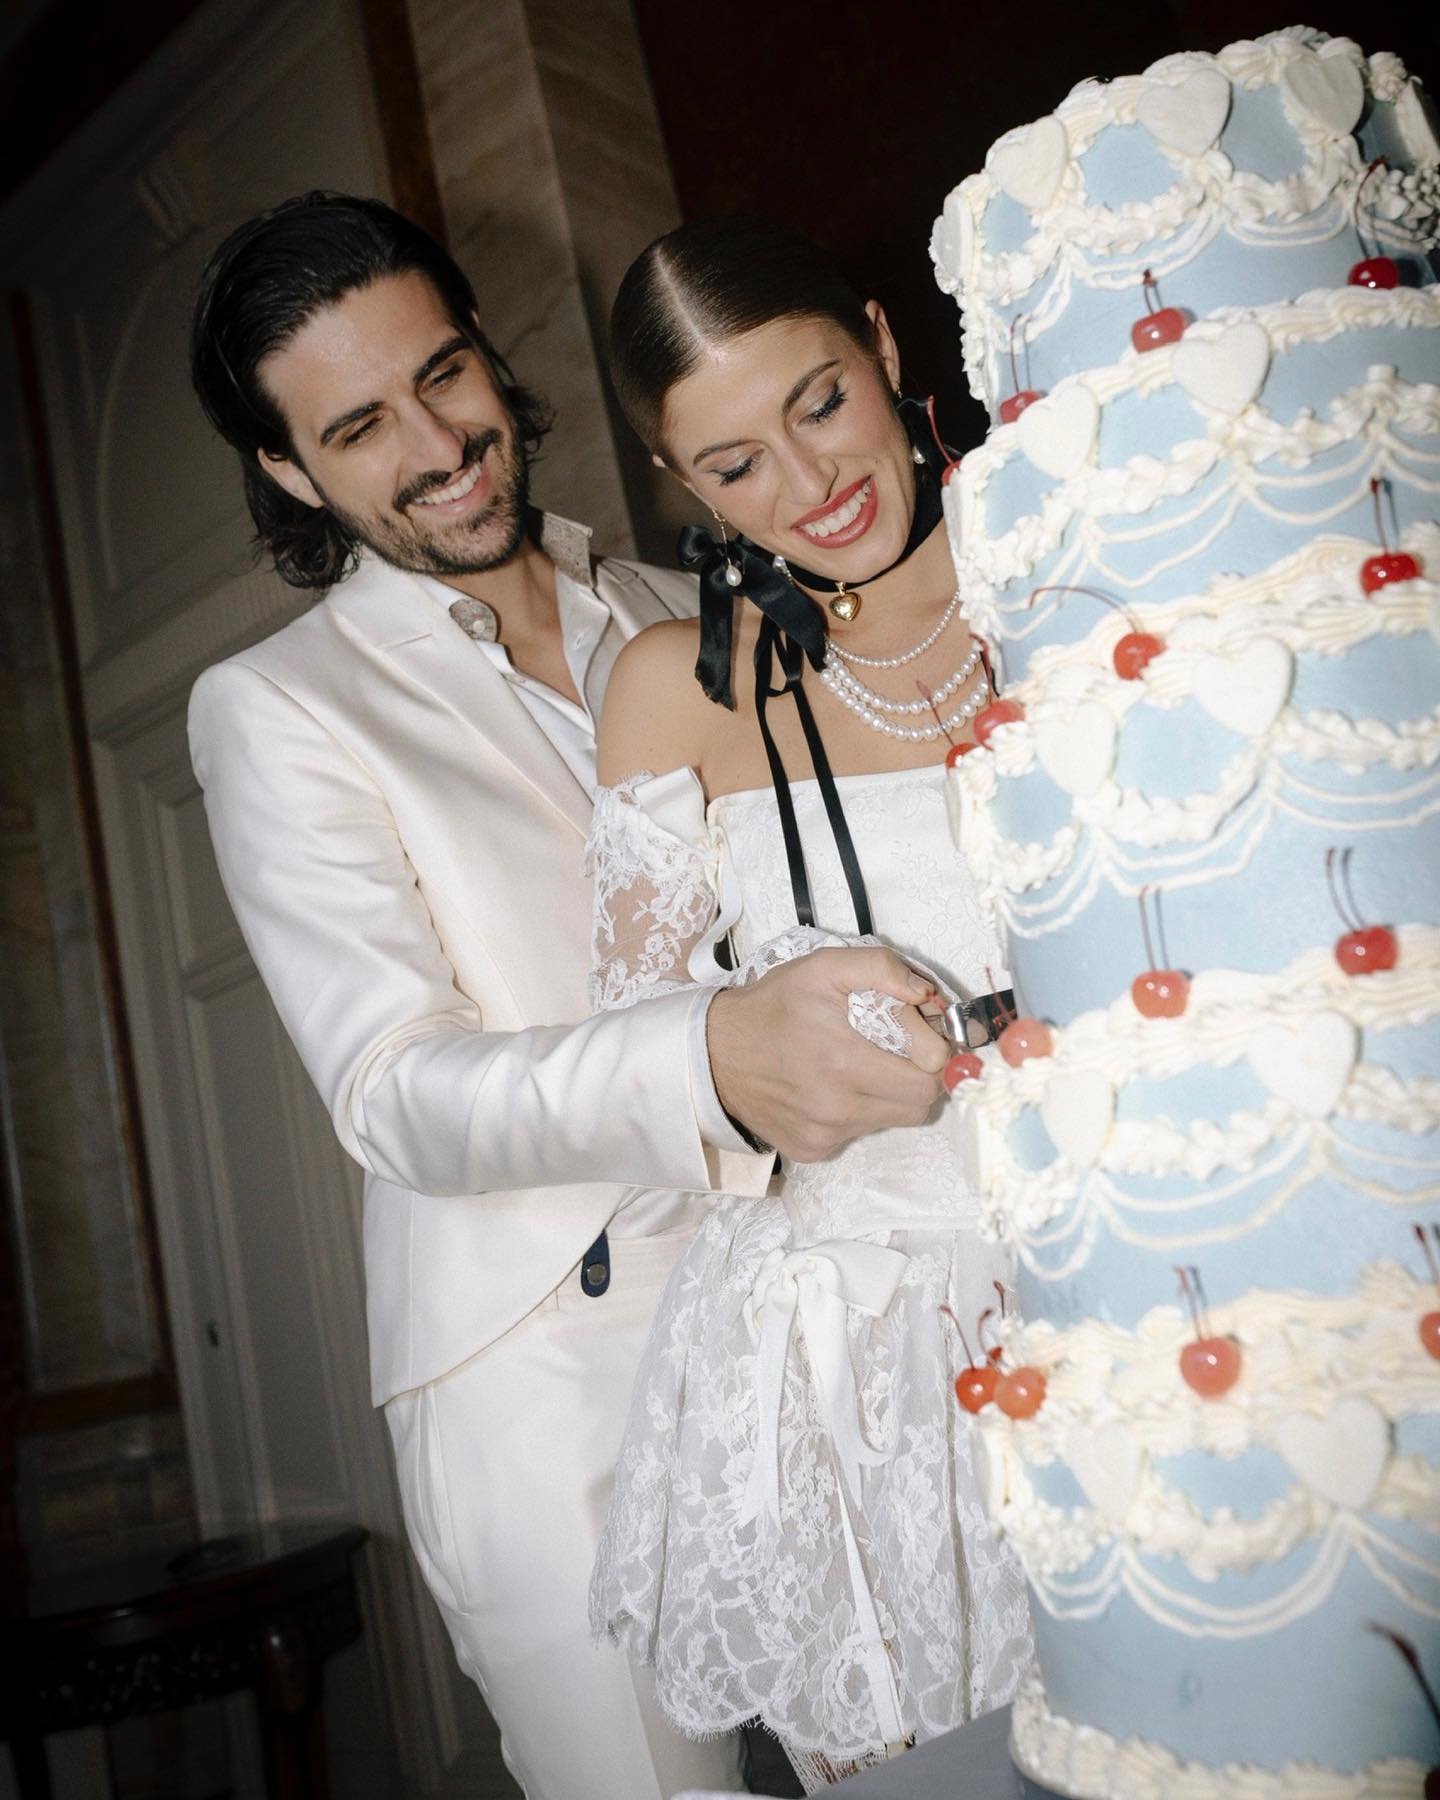 THAT CAKE !!! Have you seen anything like it?

Creative Director @elisabettalillyred 
Host @lillyredacademy 
Venue @villaserbellonibellagio 
Styling &amp; textiles @allegoria_textiles 
@raffy_flowing_communication 
Hair &amp; Makeup @thestudiocomo 
B